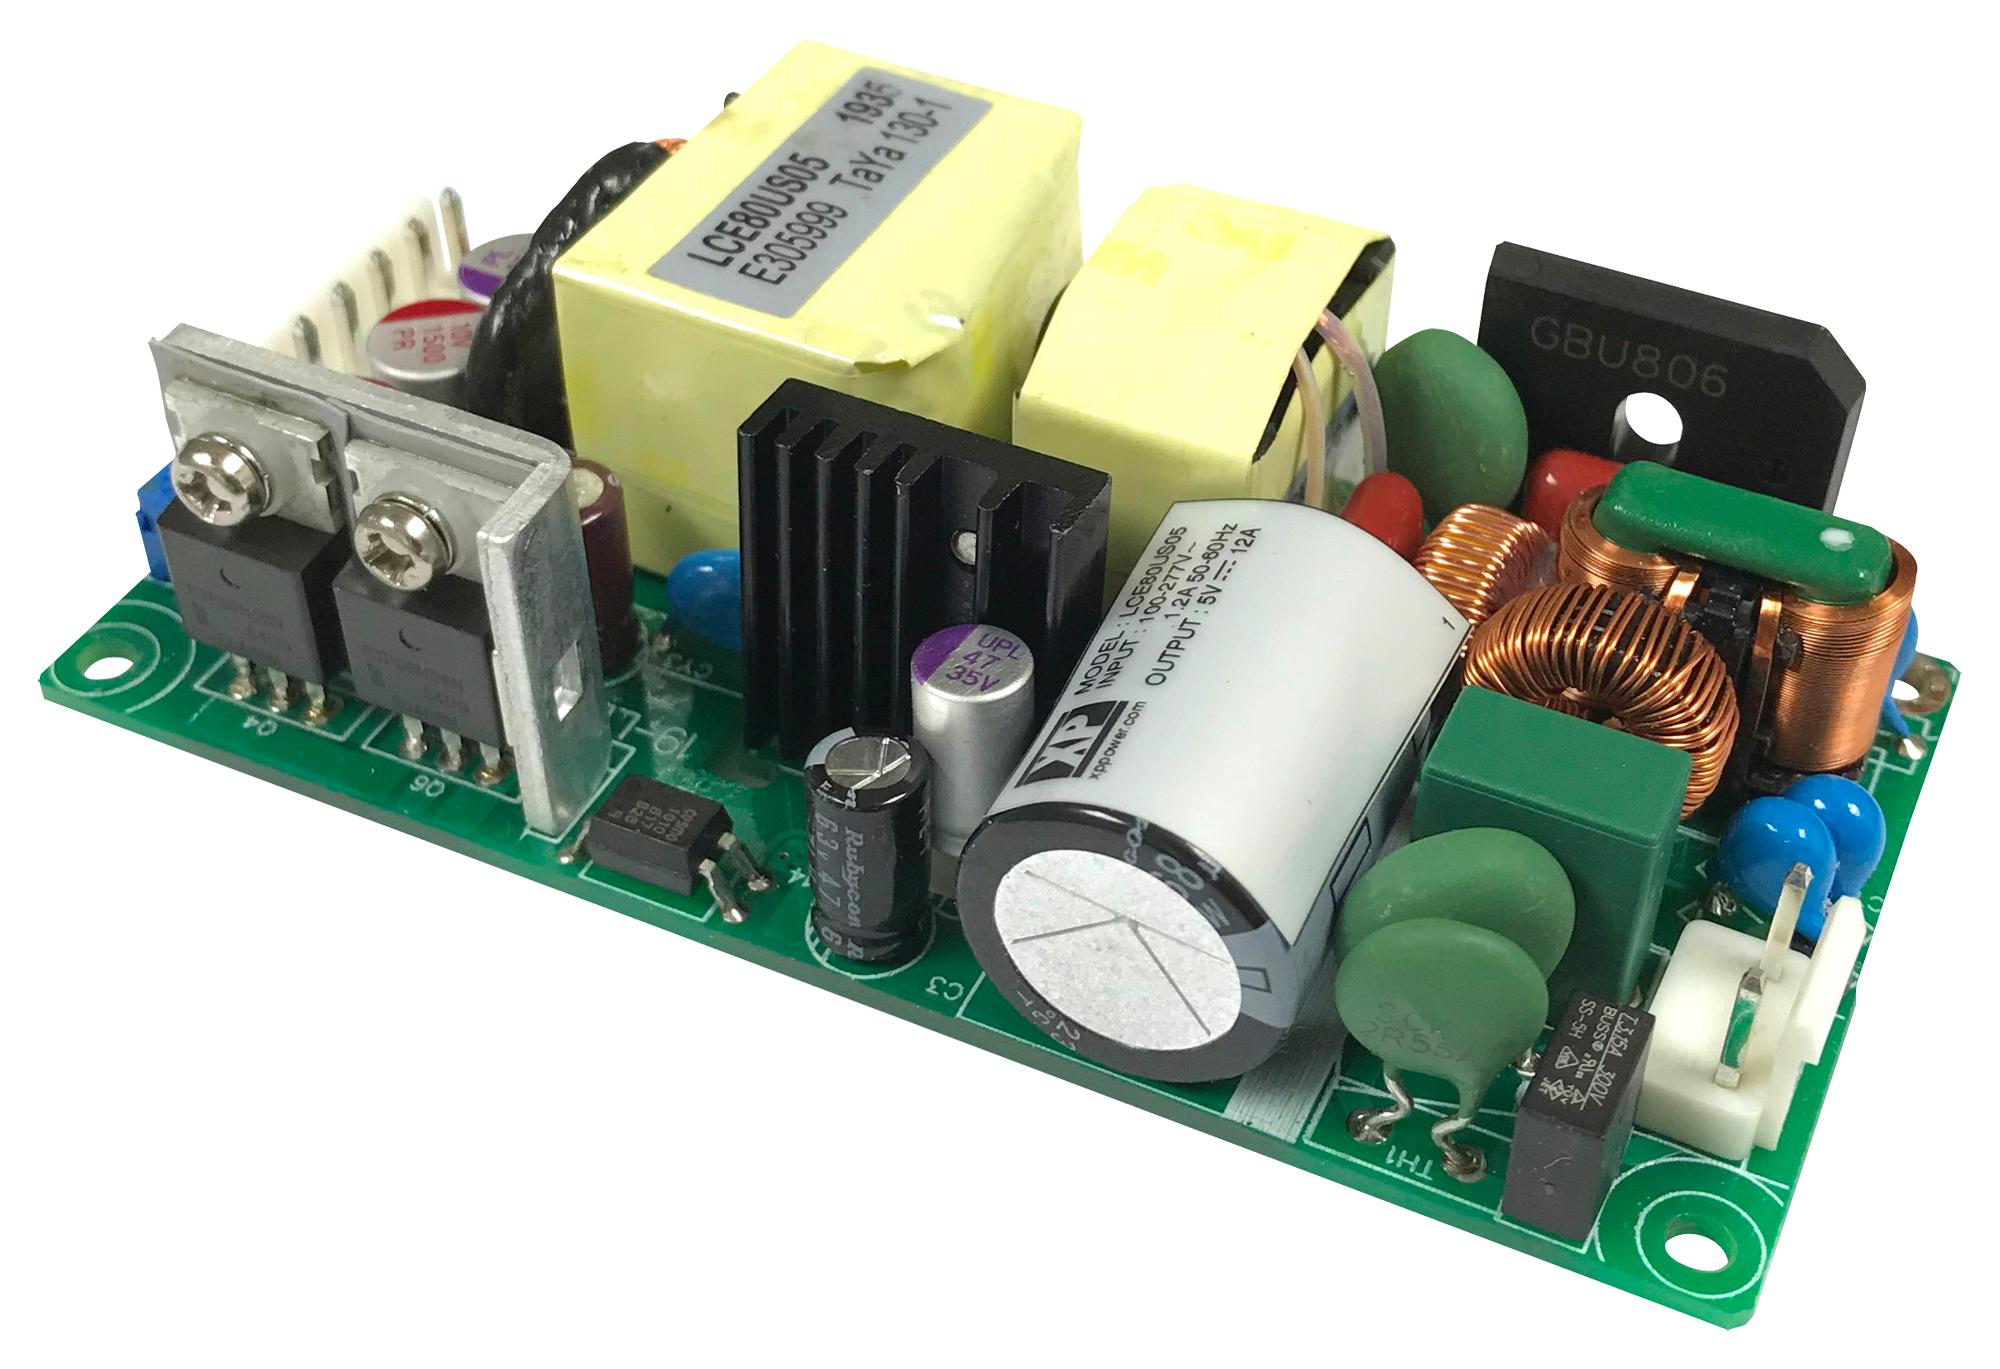 LCE80PS36 POWER SUPPLY, AC-DC, 36V, 2.22A XP POWER